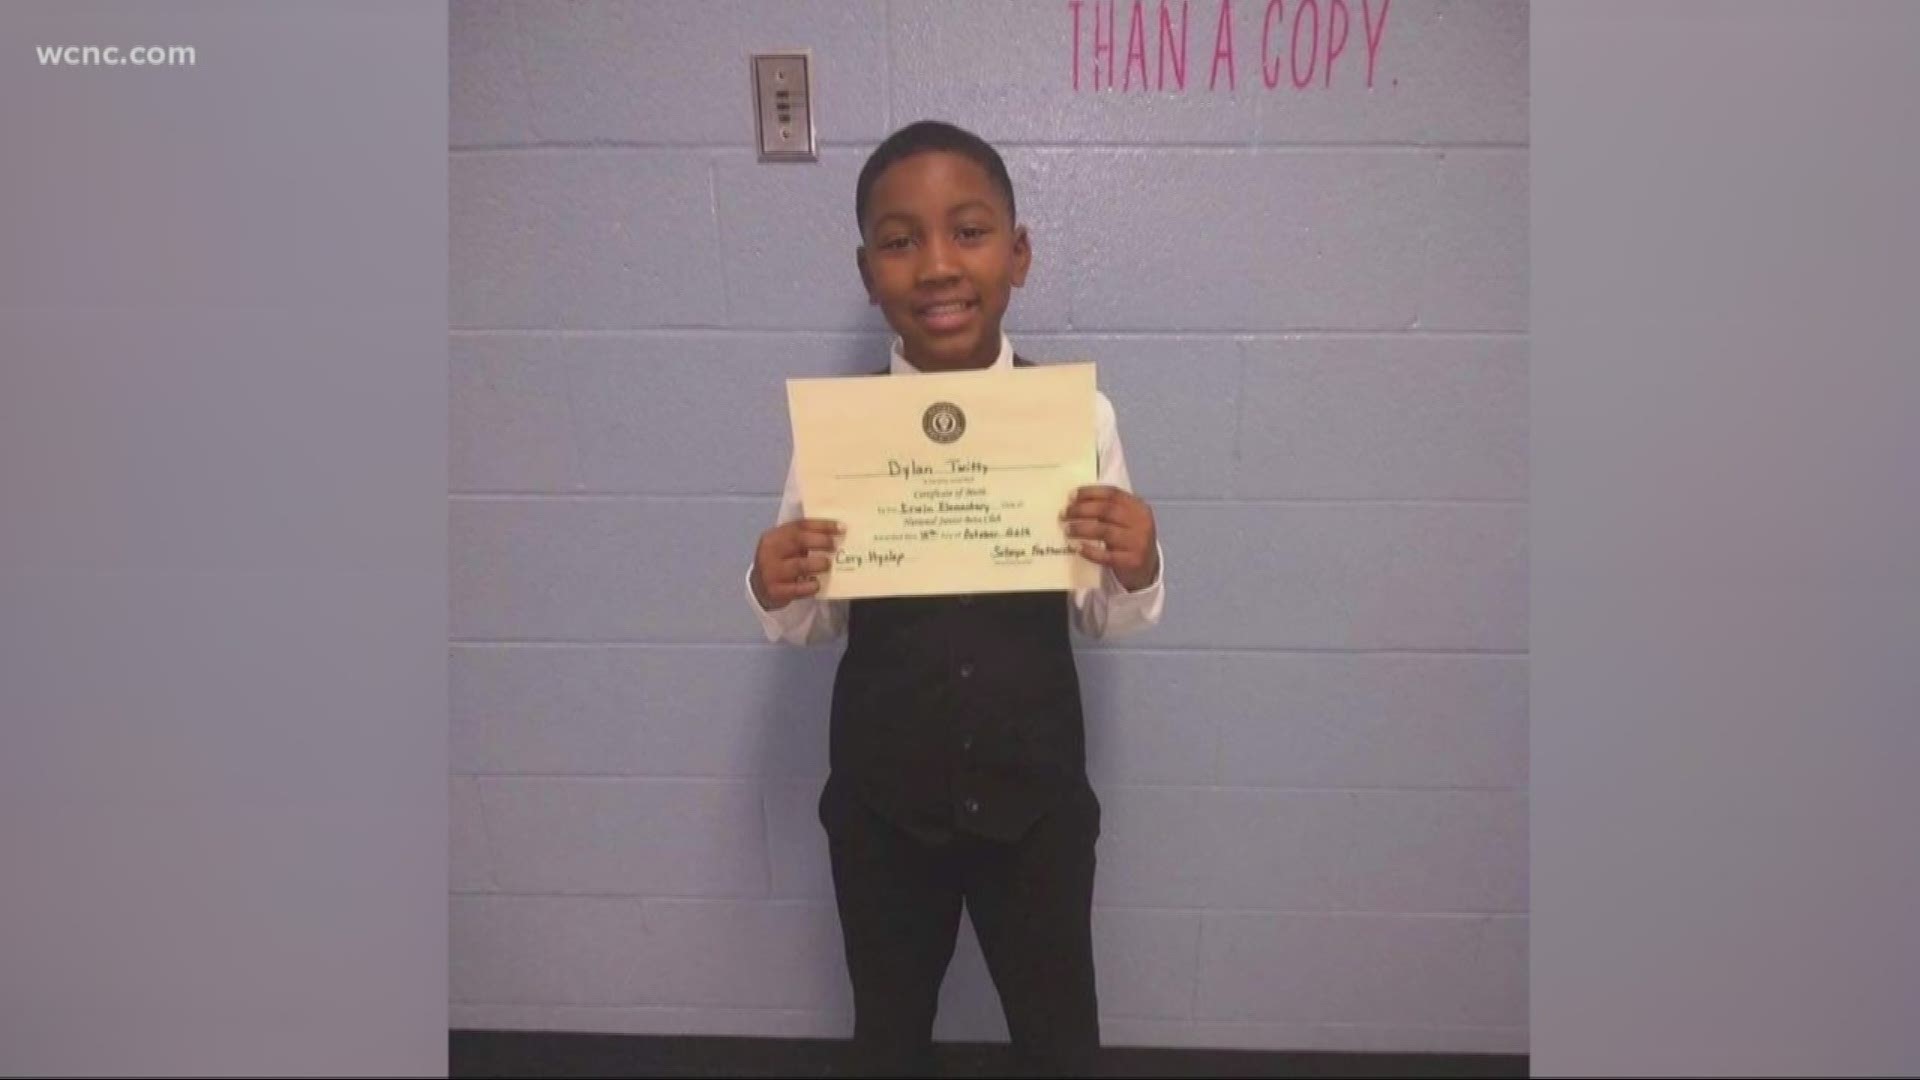 An autopsy confirmed a single gunshot wound was the official cause of death for 10-year-old Dylan Twitty.